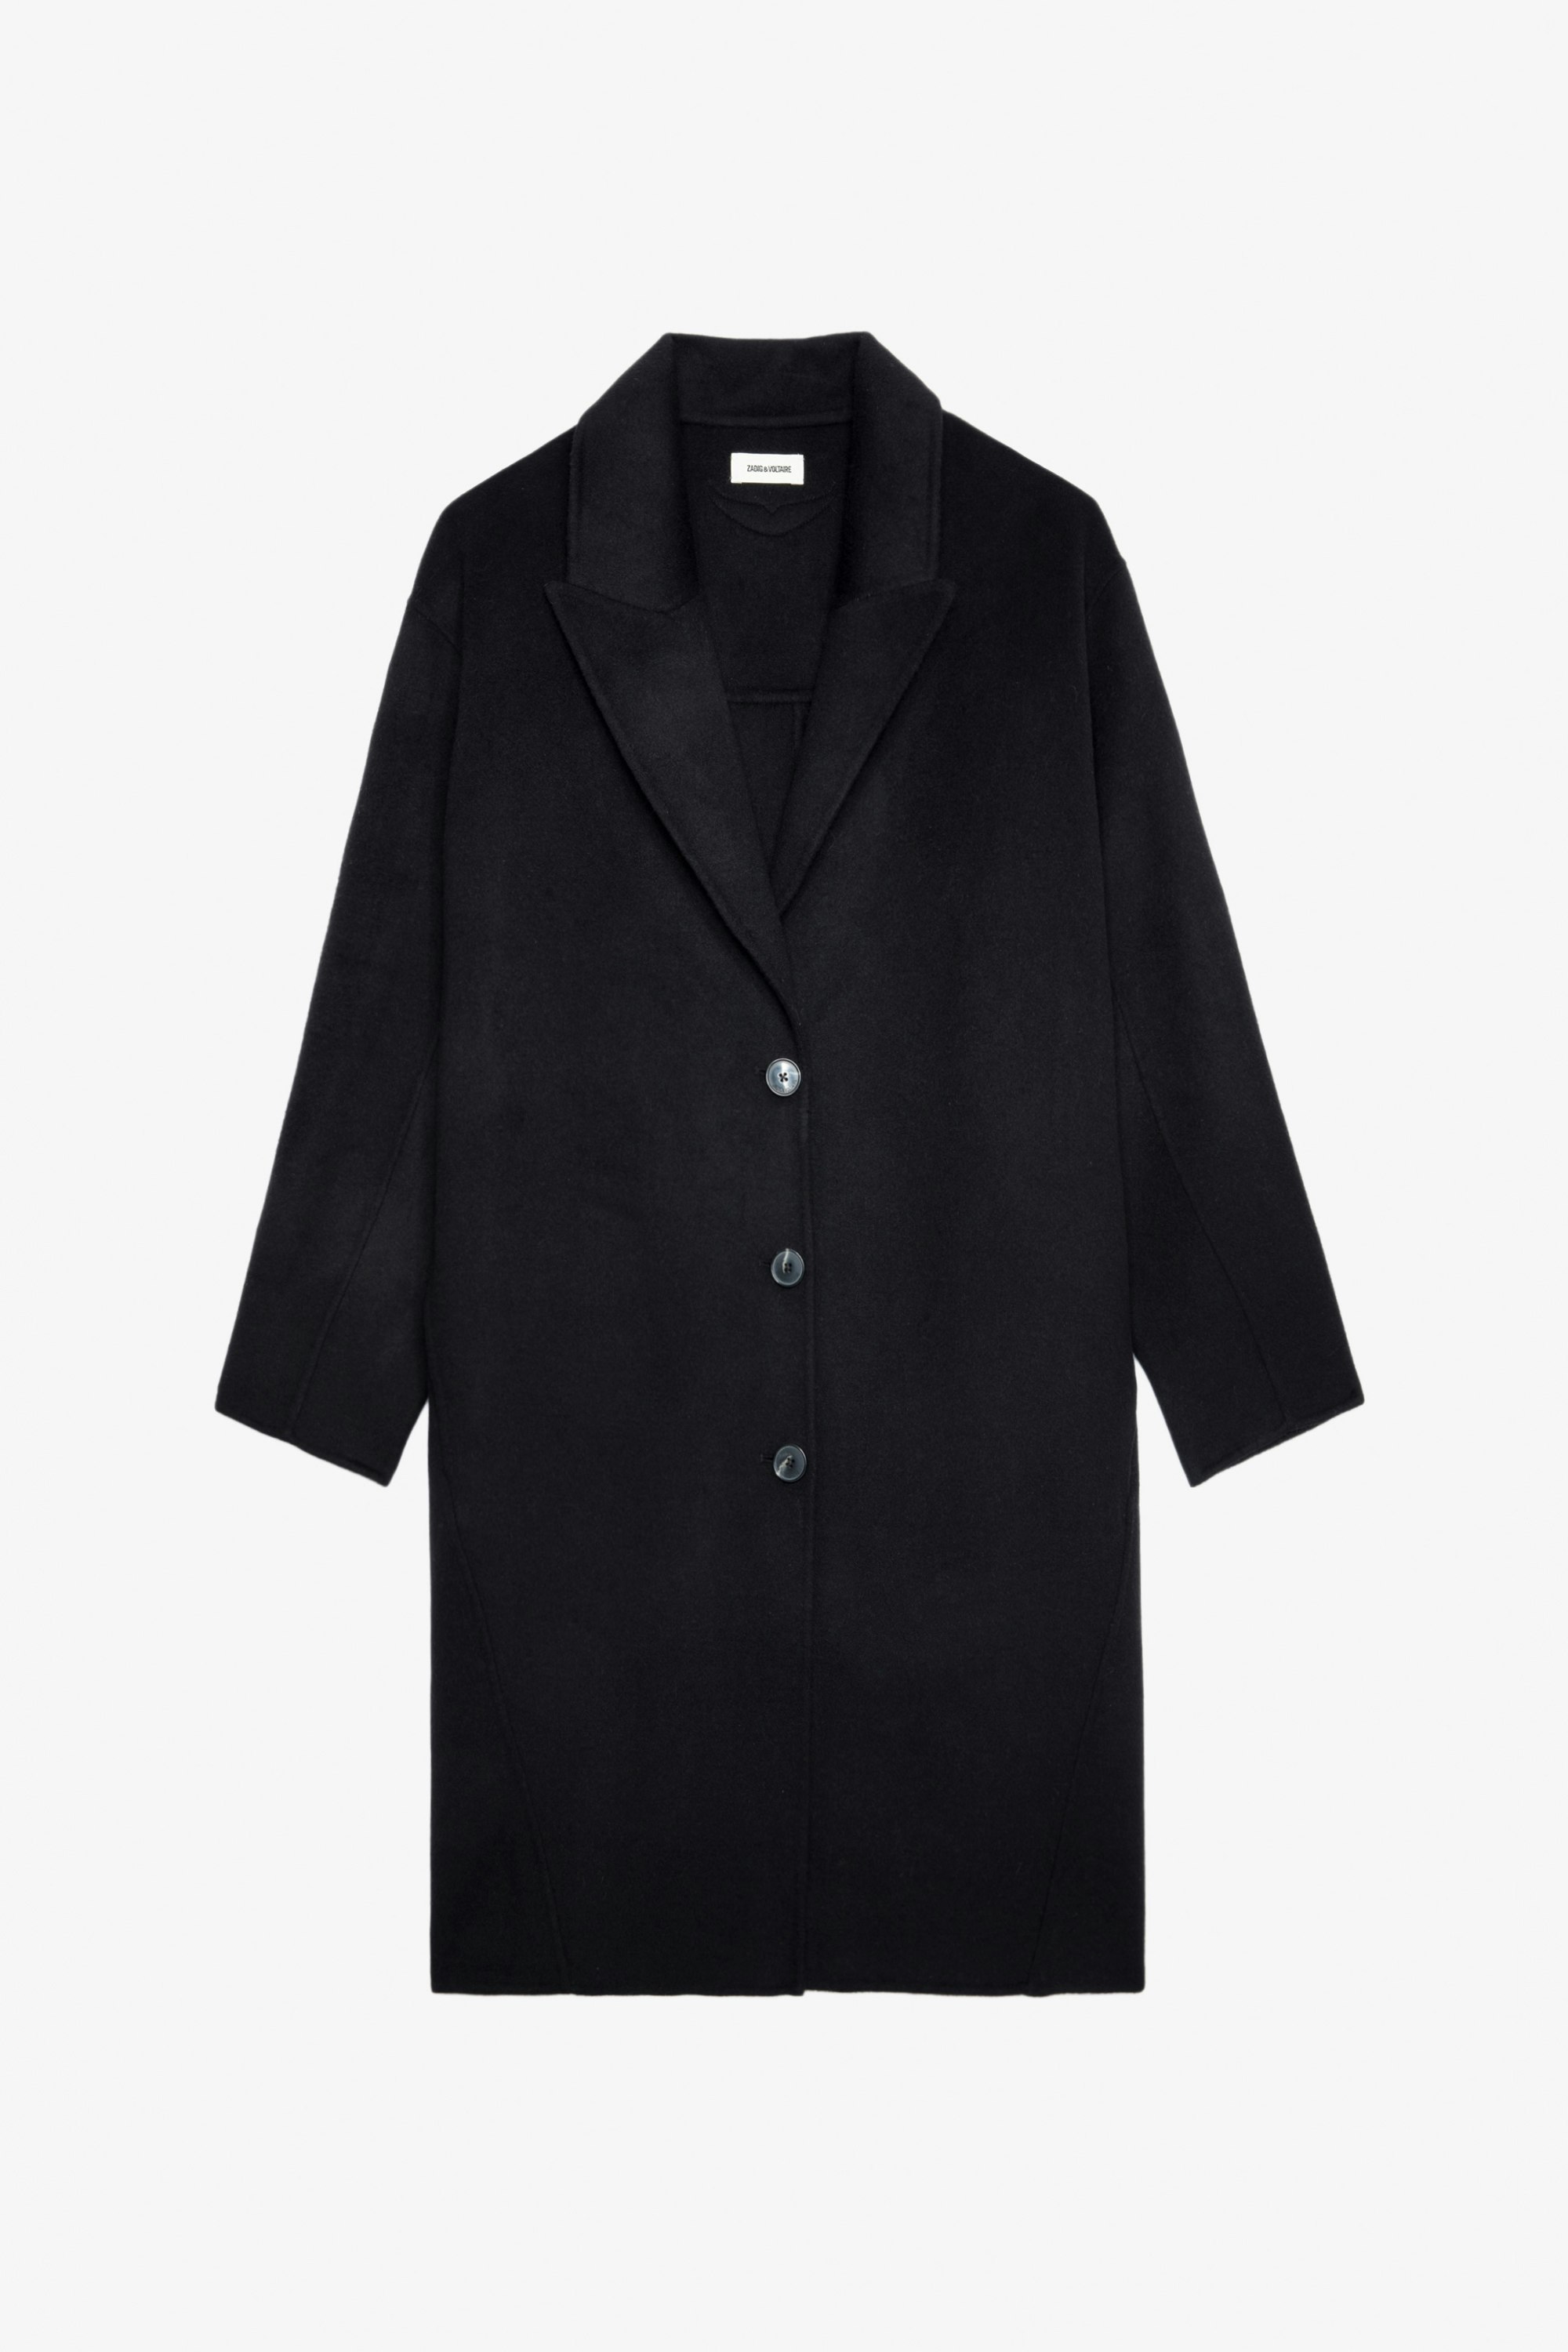 Mady Coat - Women’s long black wool mix coat with wings motif on the back.